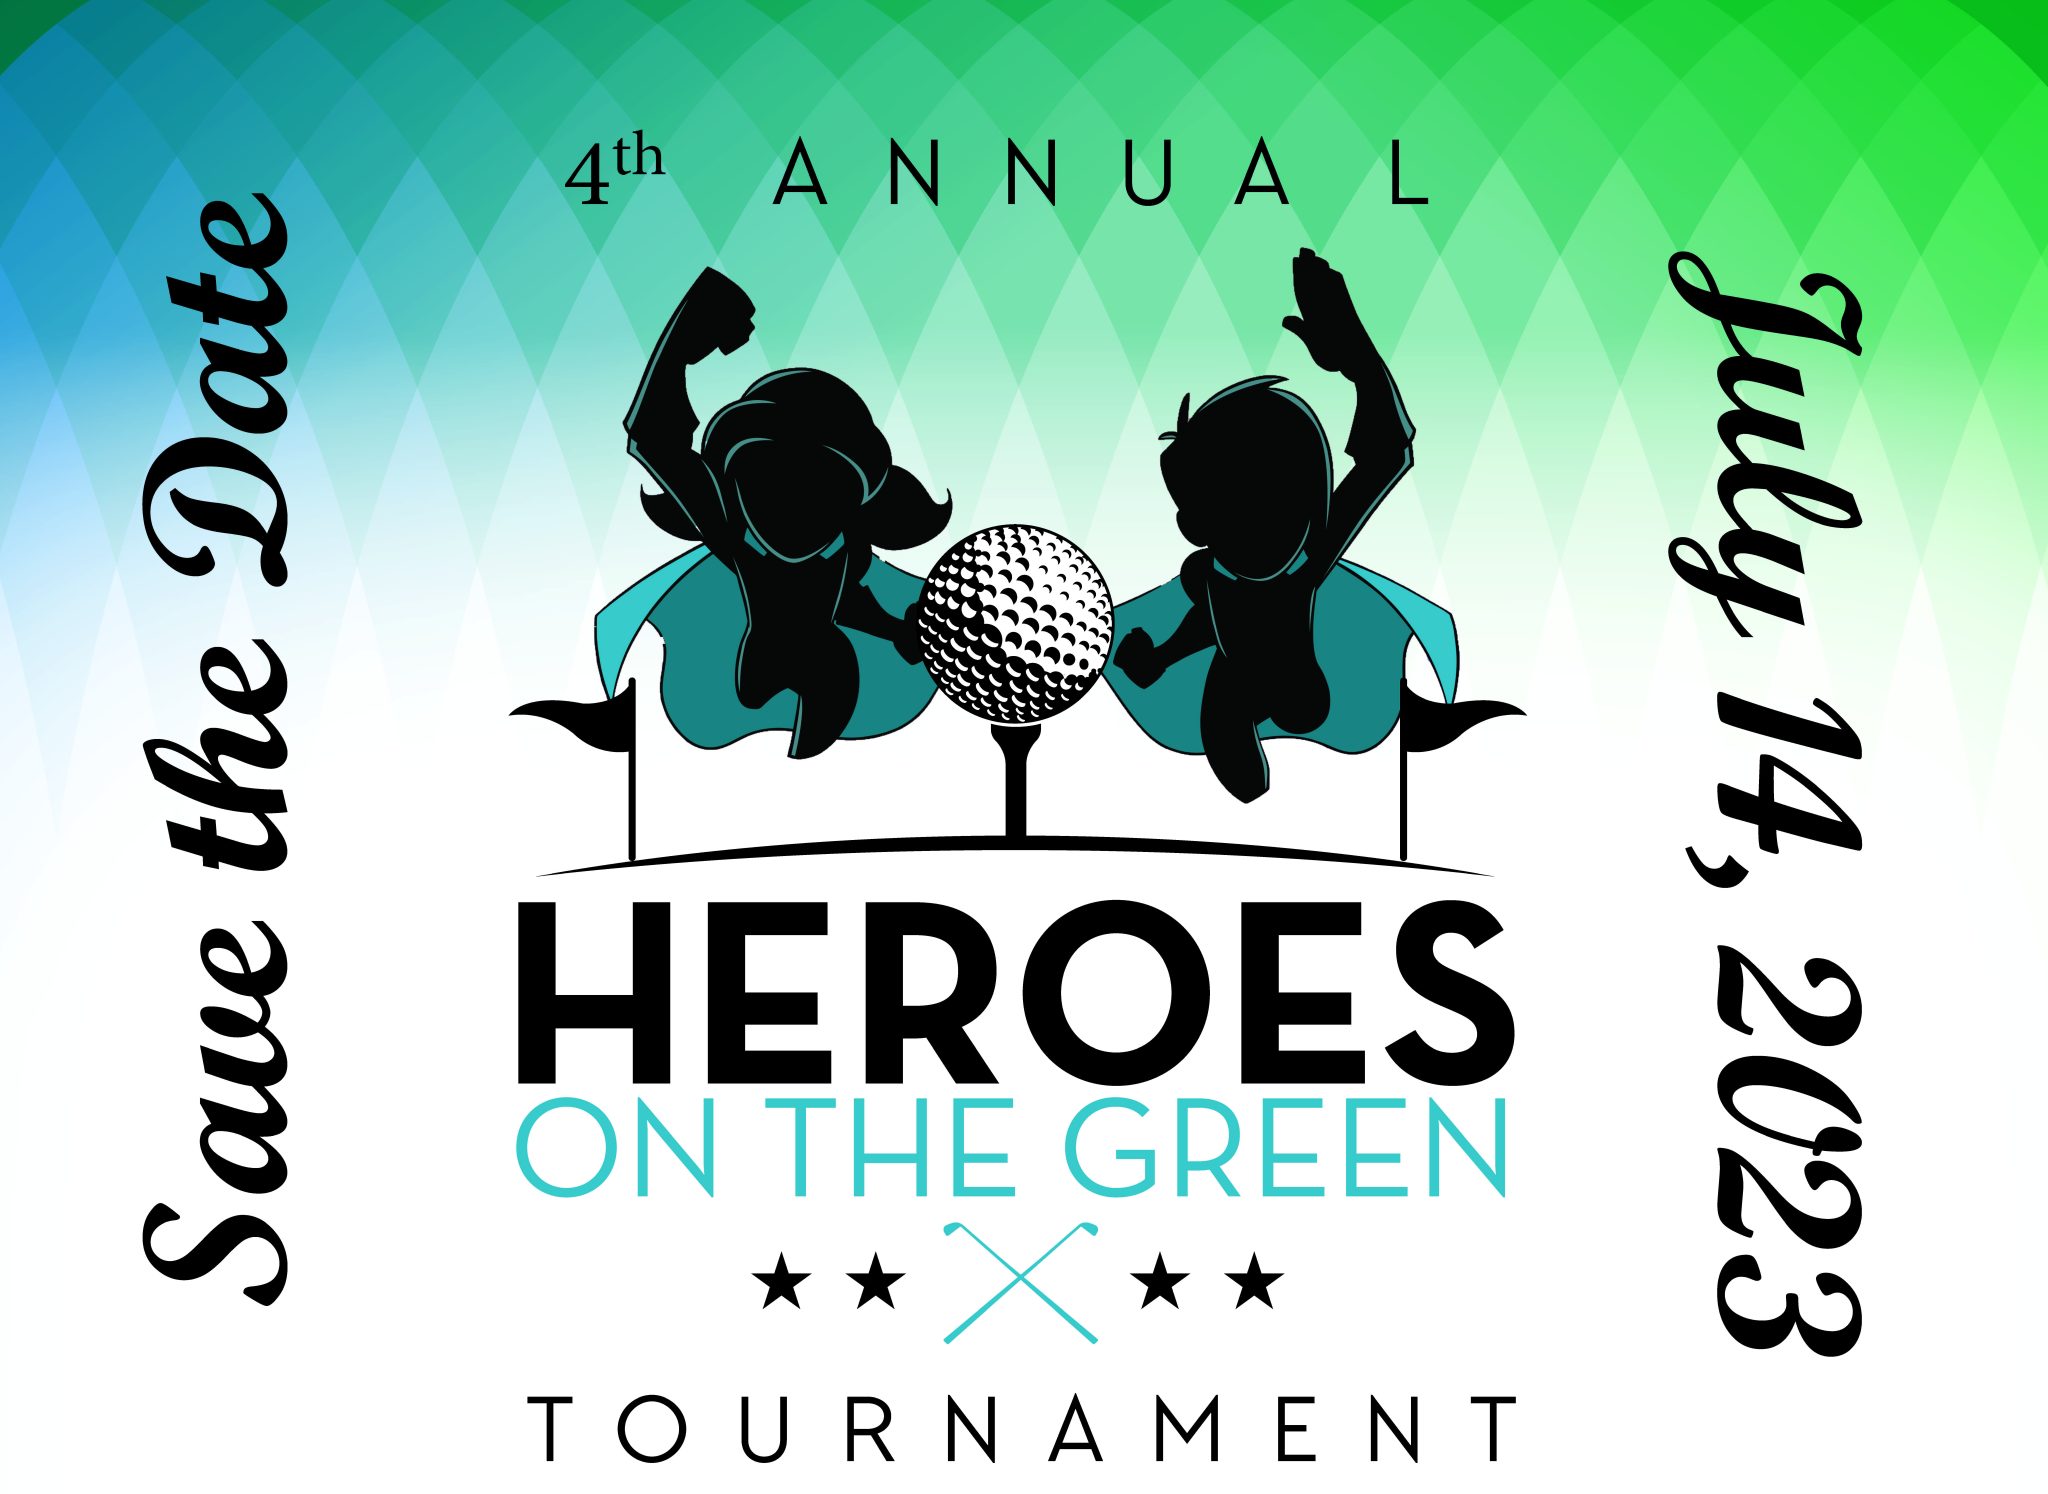 Save the date for the 4th annual Heroes on the Green tournament.